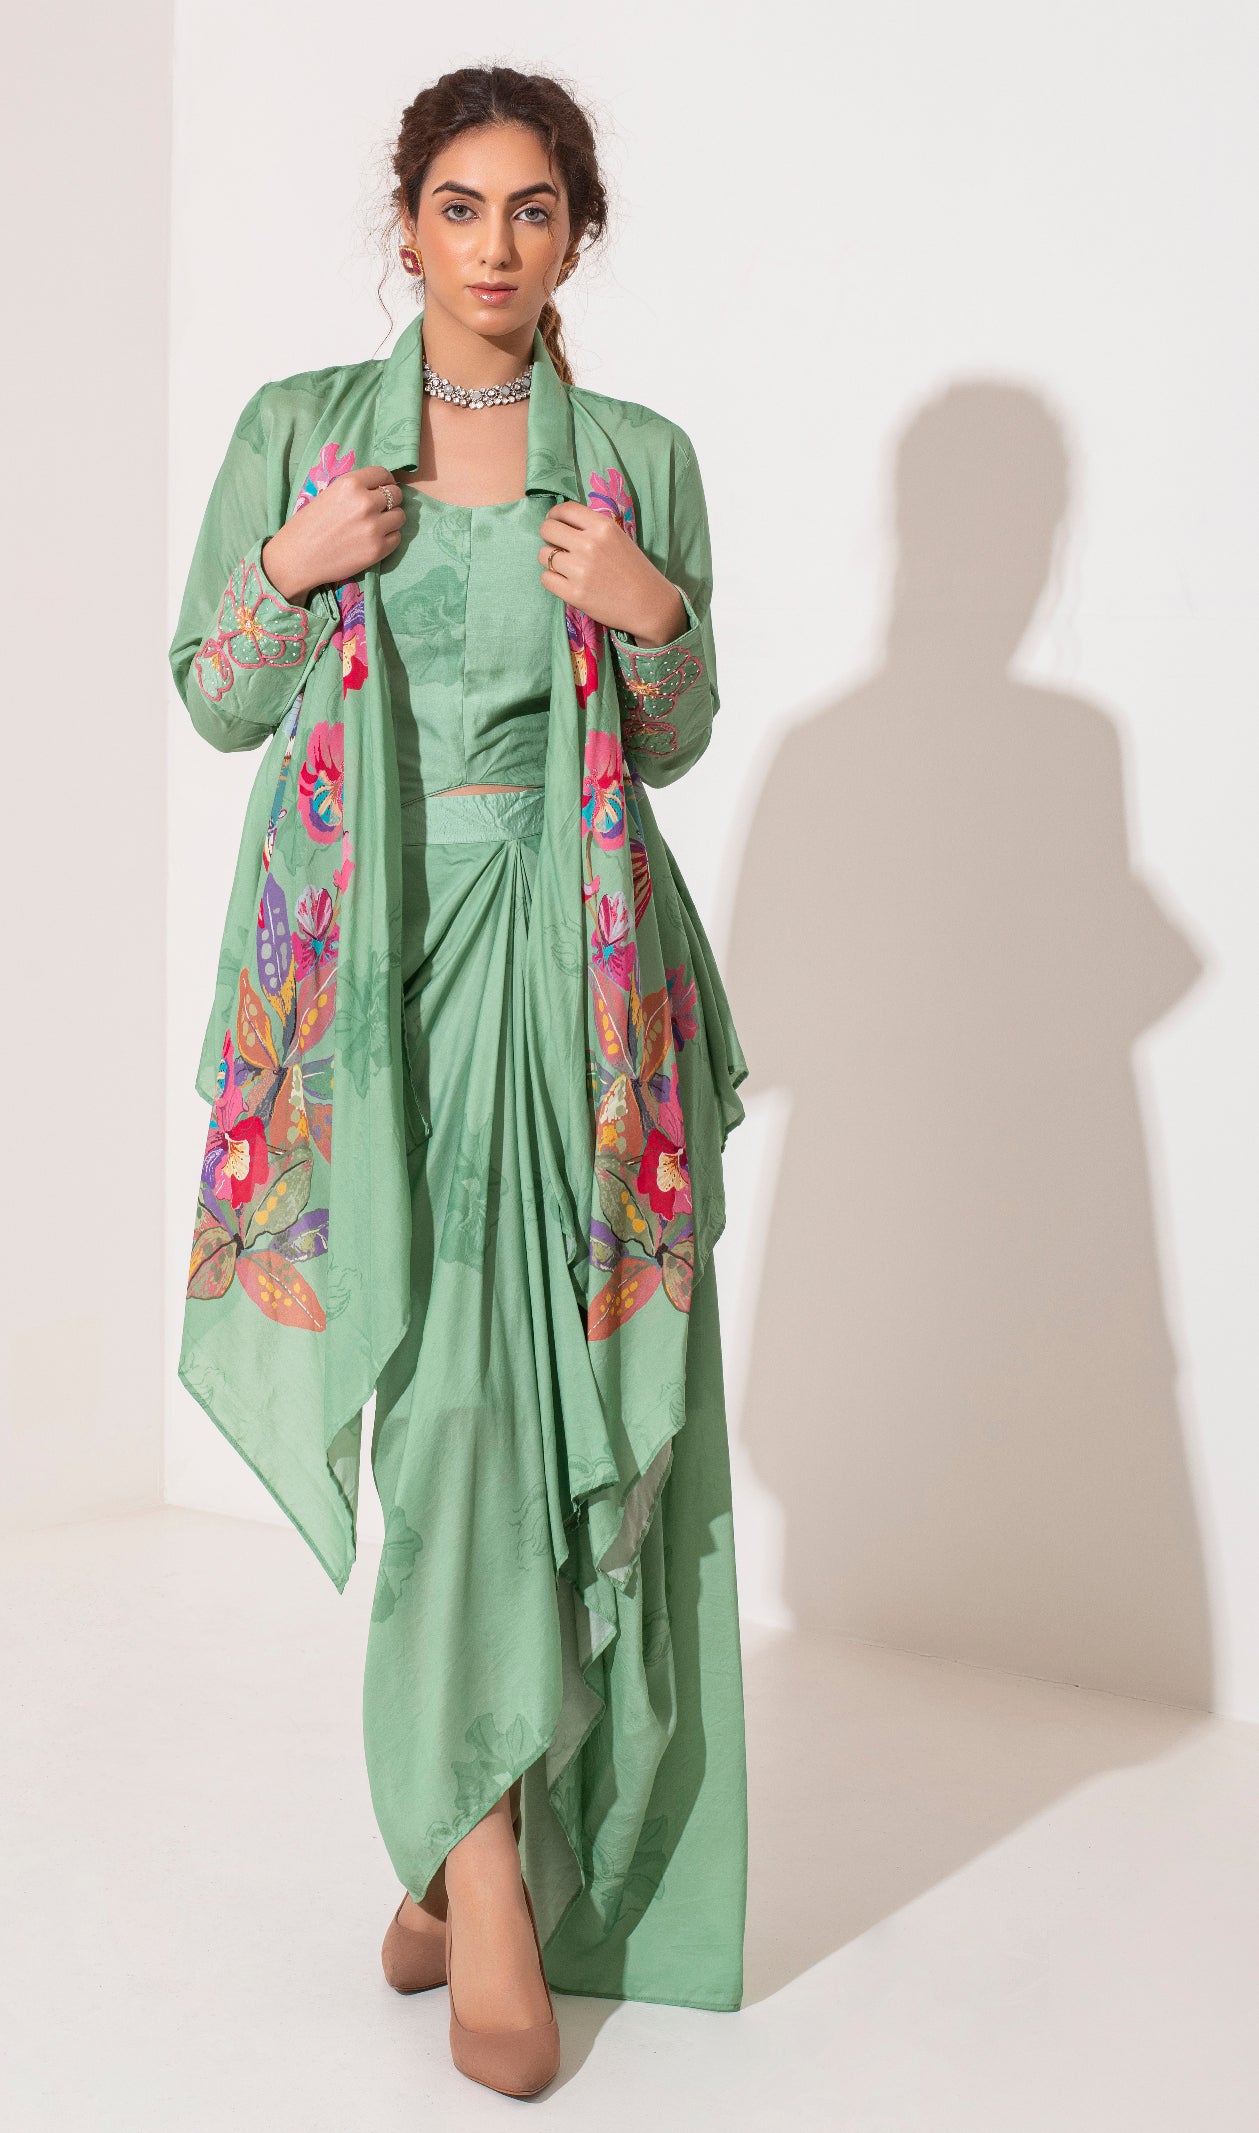 Pista green placement printed asymmetric jacket bustier and draped skirt.